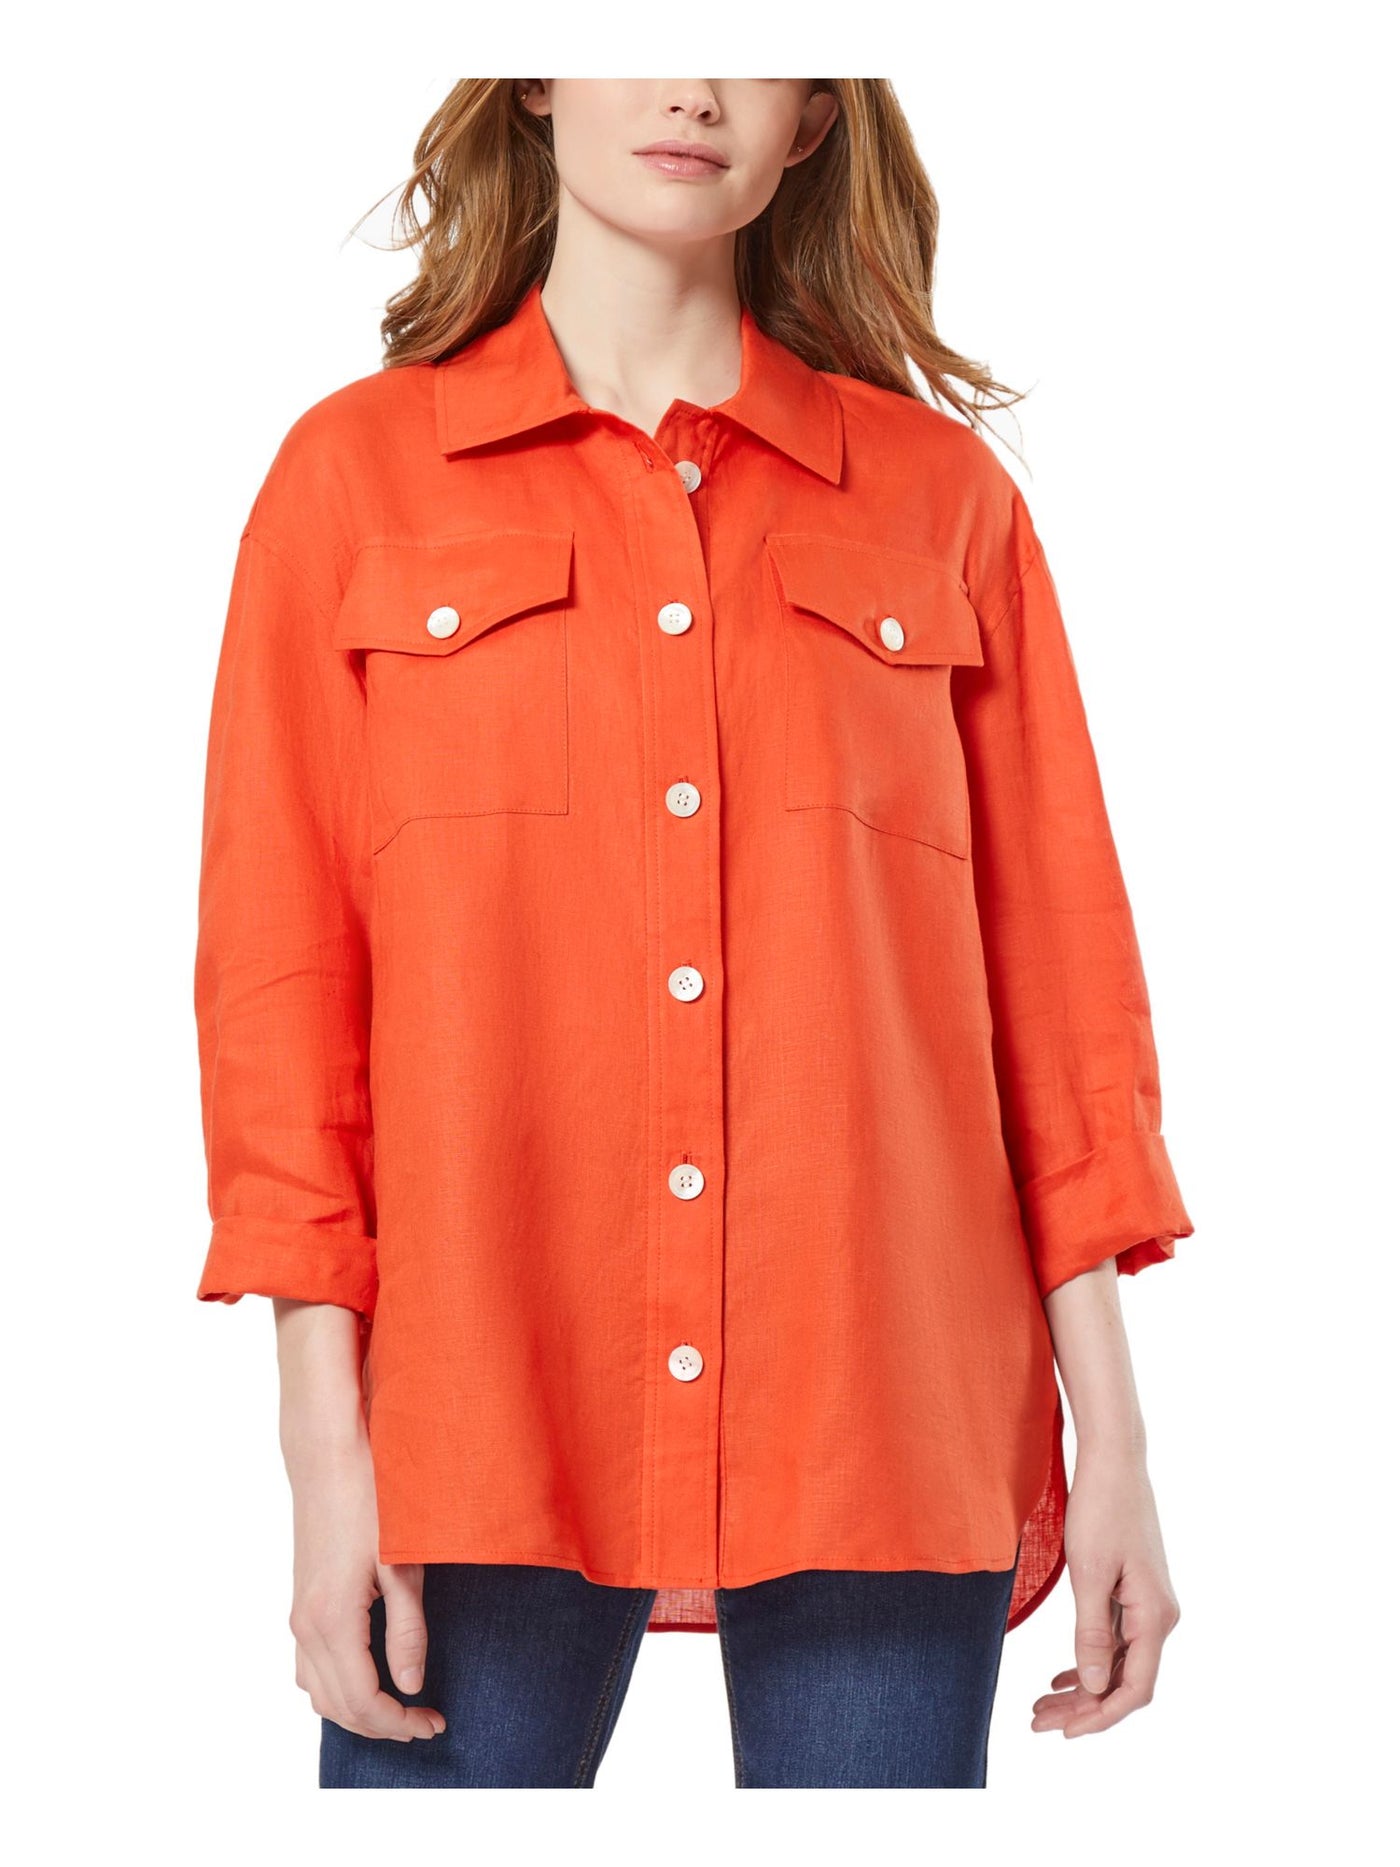 JONES NEW YORK Womens Orange Textured Pocketed Unlined Sheer Vented Round Hem Roll-tab Sleeve Collared Button Up Top M